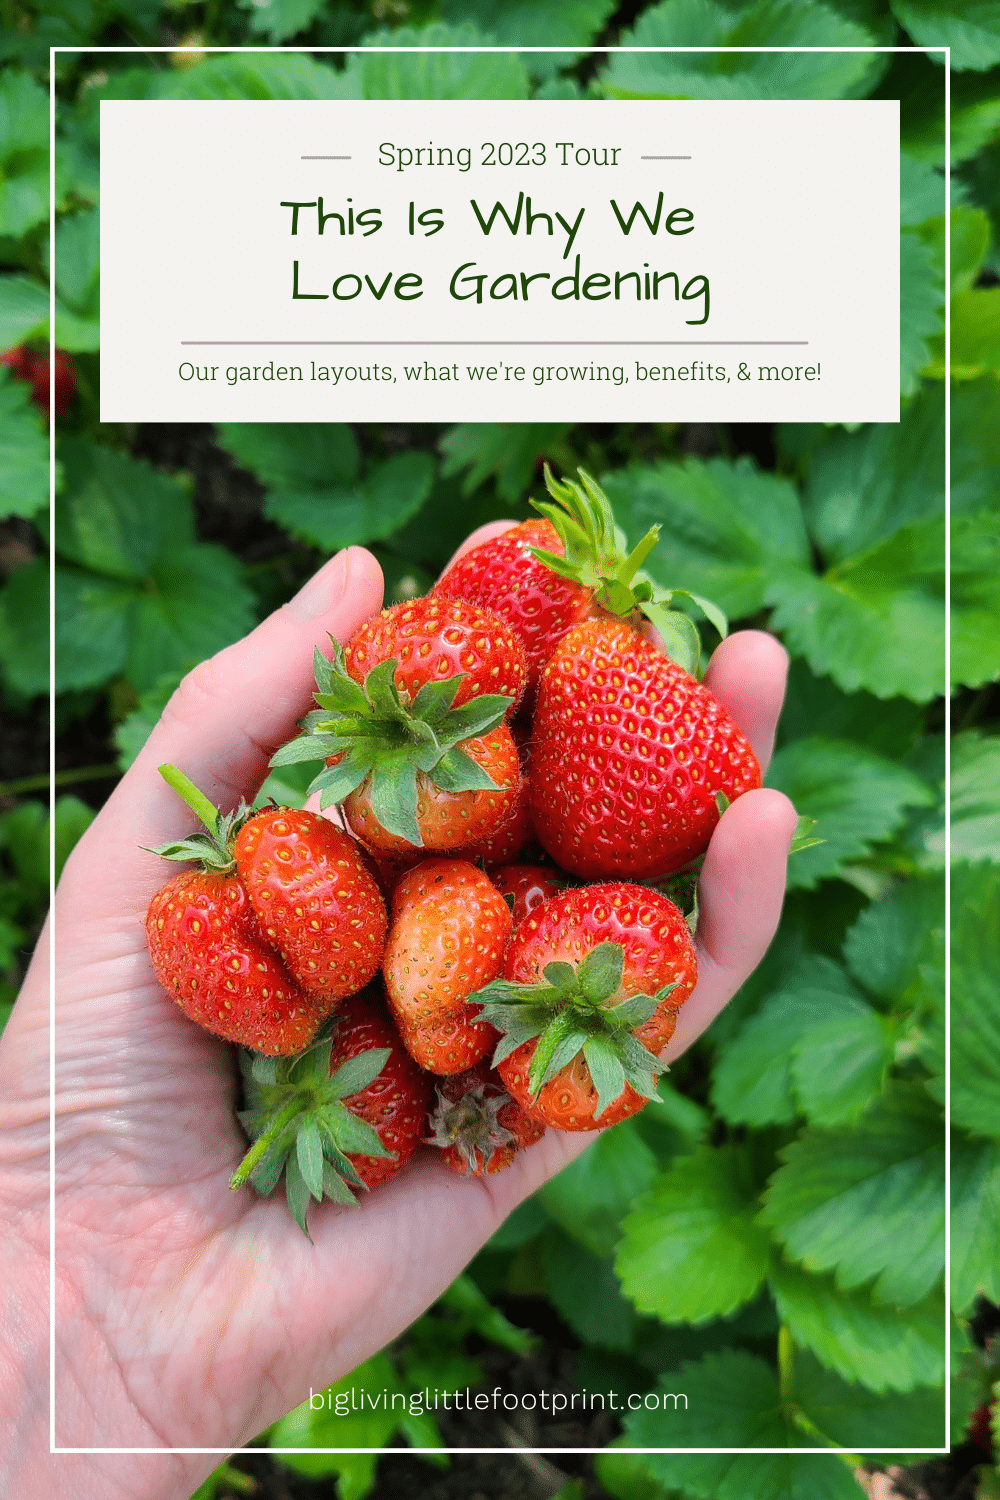 This Is Why We Love Gardening – Spring 2023 Tour